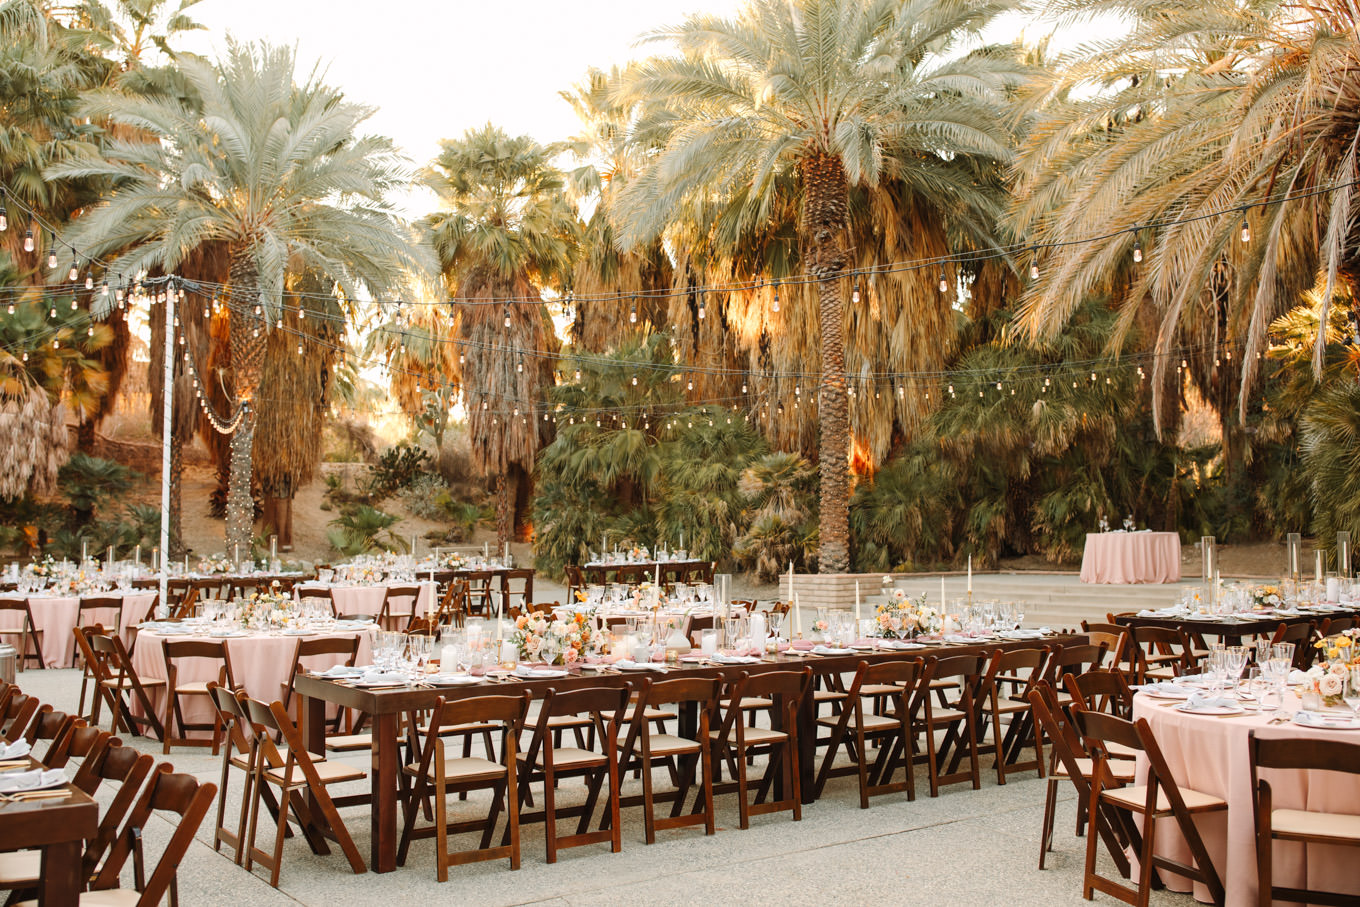 Wedding reception in palm garden | Living Desert Zoo & Gardens wedding with unique details | Elevated and colorful wedding photography for fun-loving couples in Southern California |  #PalmSprings #palmspringsphotographer #gardenwedding #palmspringswedding  Source: Mary Costa Photography | Los Angeles wedding photographer 